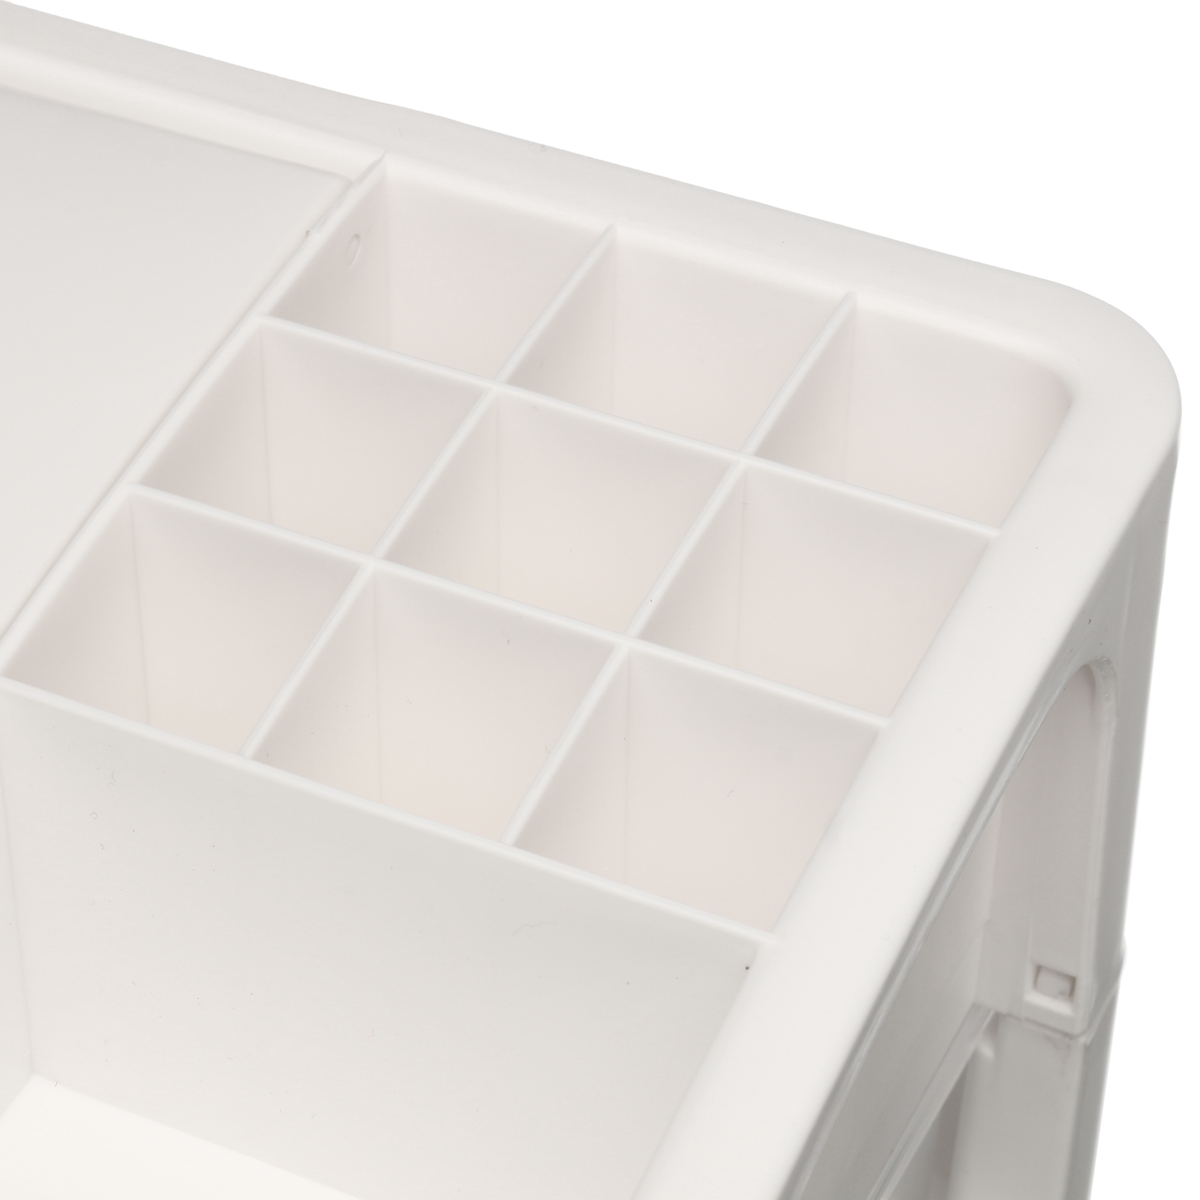 23-Layers-Clear-Drawers-Makeup-Case-Cosmetic-Organizer-Storage-Jewelry-Box-Holder-1490773-10